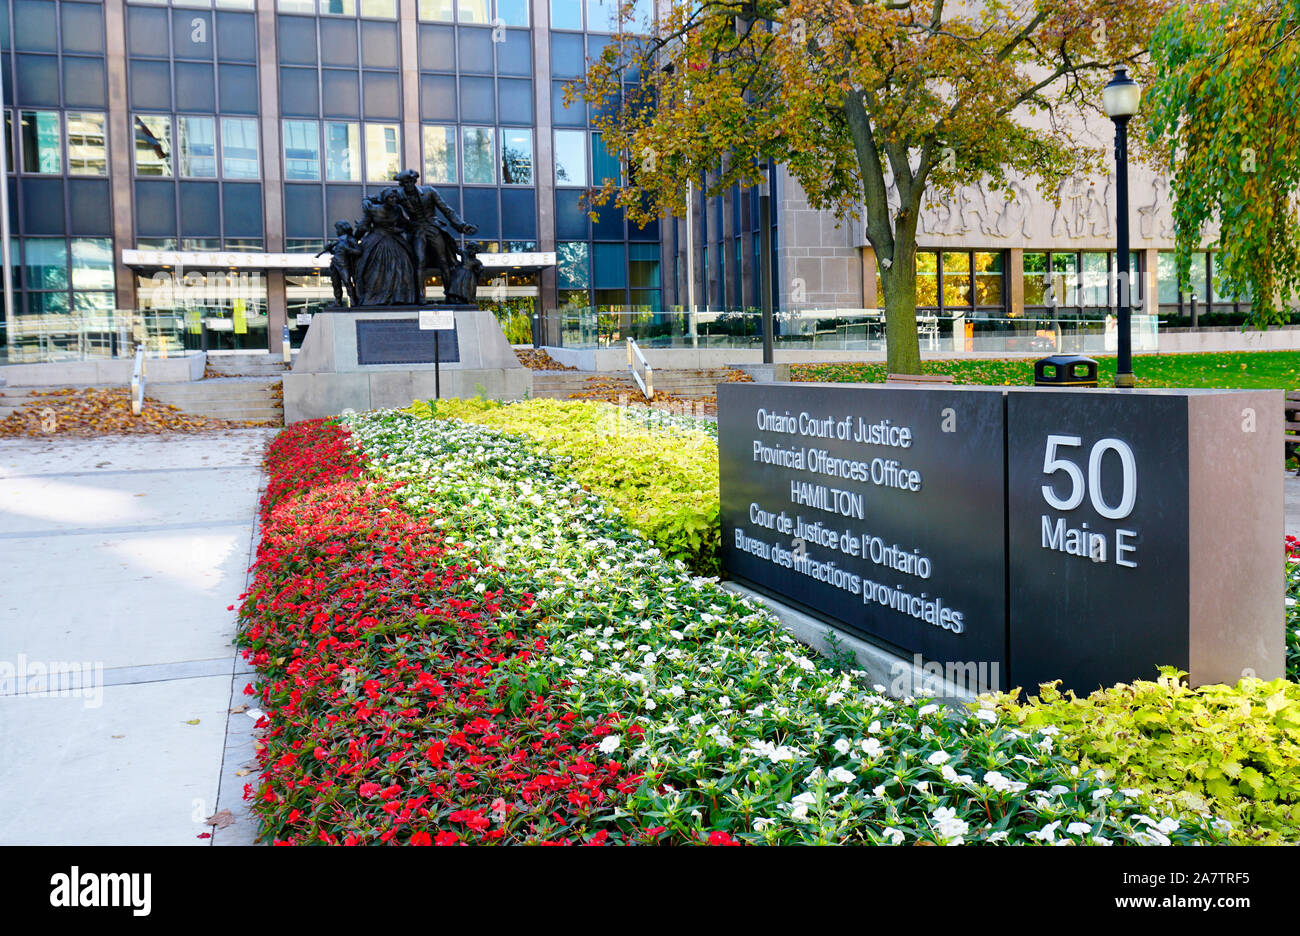 Ontario Court of Justice Provincial Offences Office in Hamilton, Ontario, Canada Stock Photo